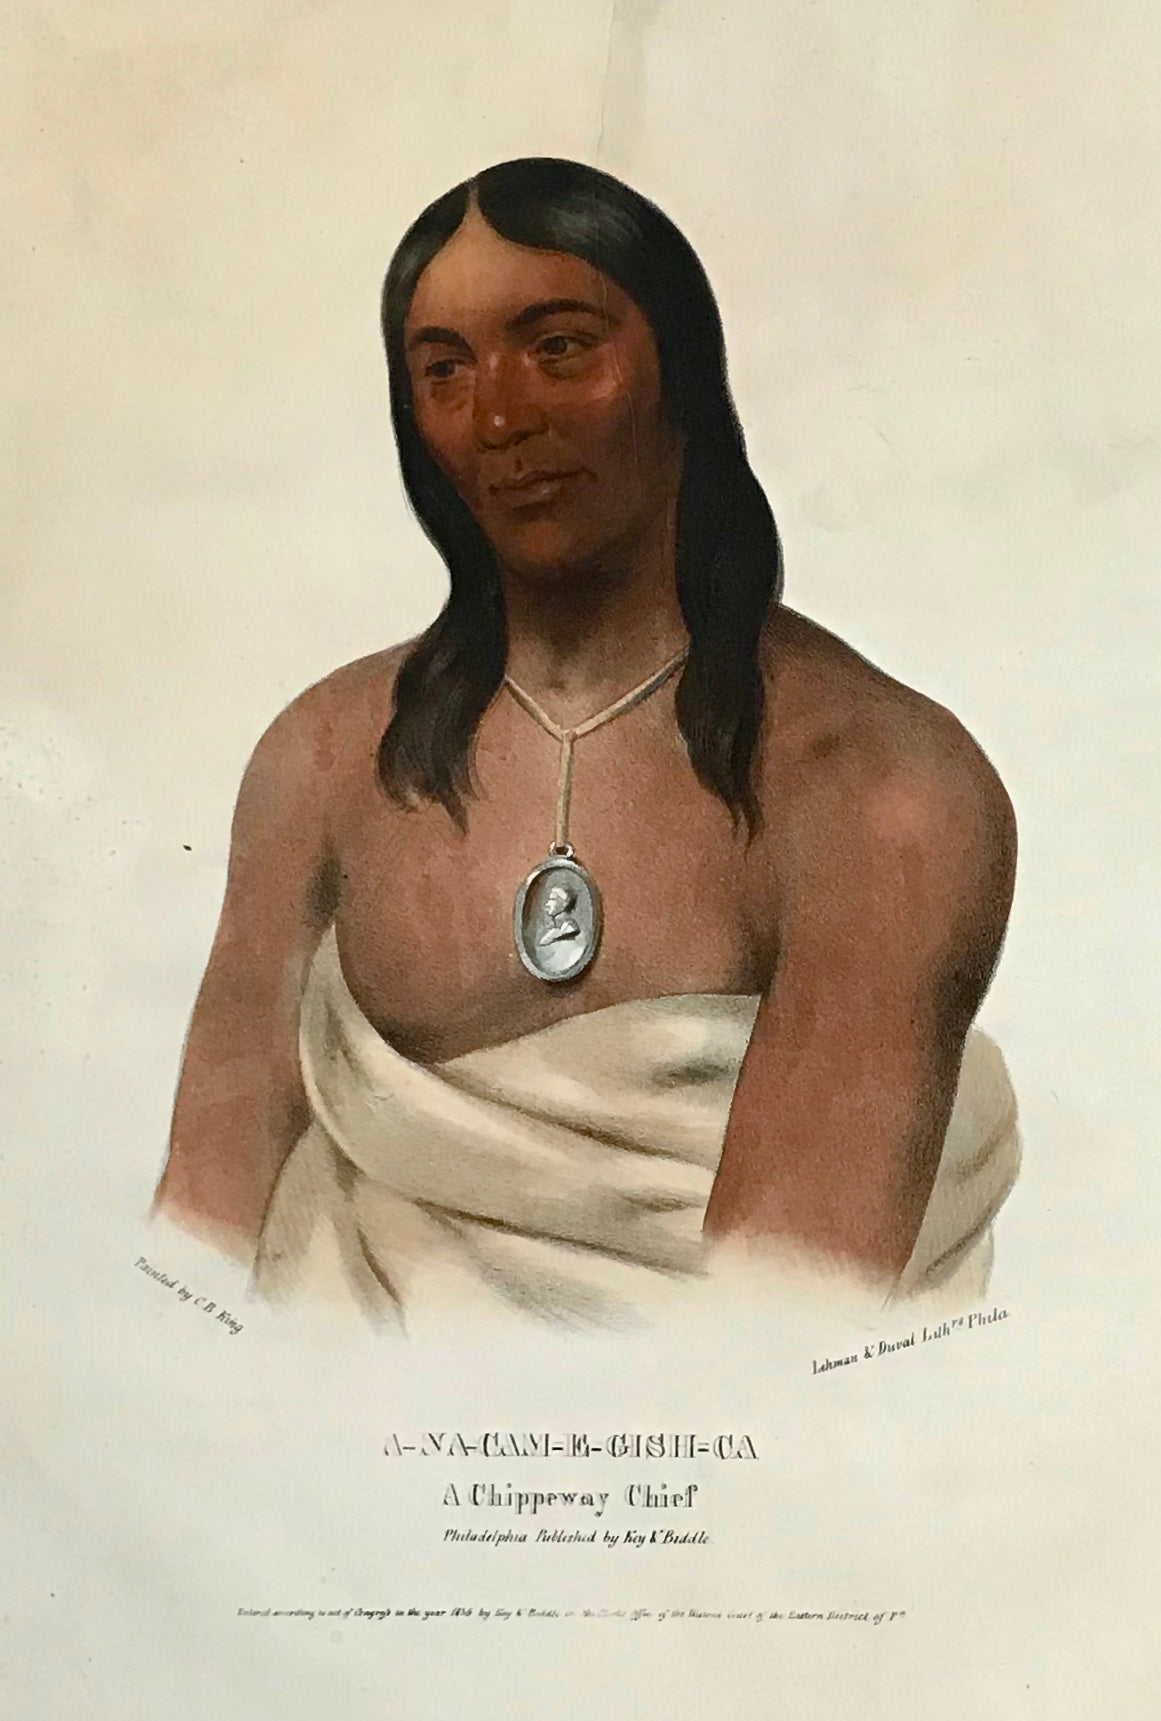 "A-Na-Cam-E-Gish-Ca A Chippeway Chief" Lithograph. Original hand coloring Painting by Charles Bird King (1785-1862) Published in: "History of the Indian Tribes of North America" Authors: Thomas Loraine McKenny (1785-1859) and James Hall (1793-1868) Folio edition